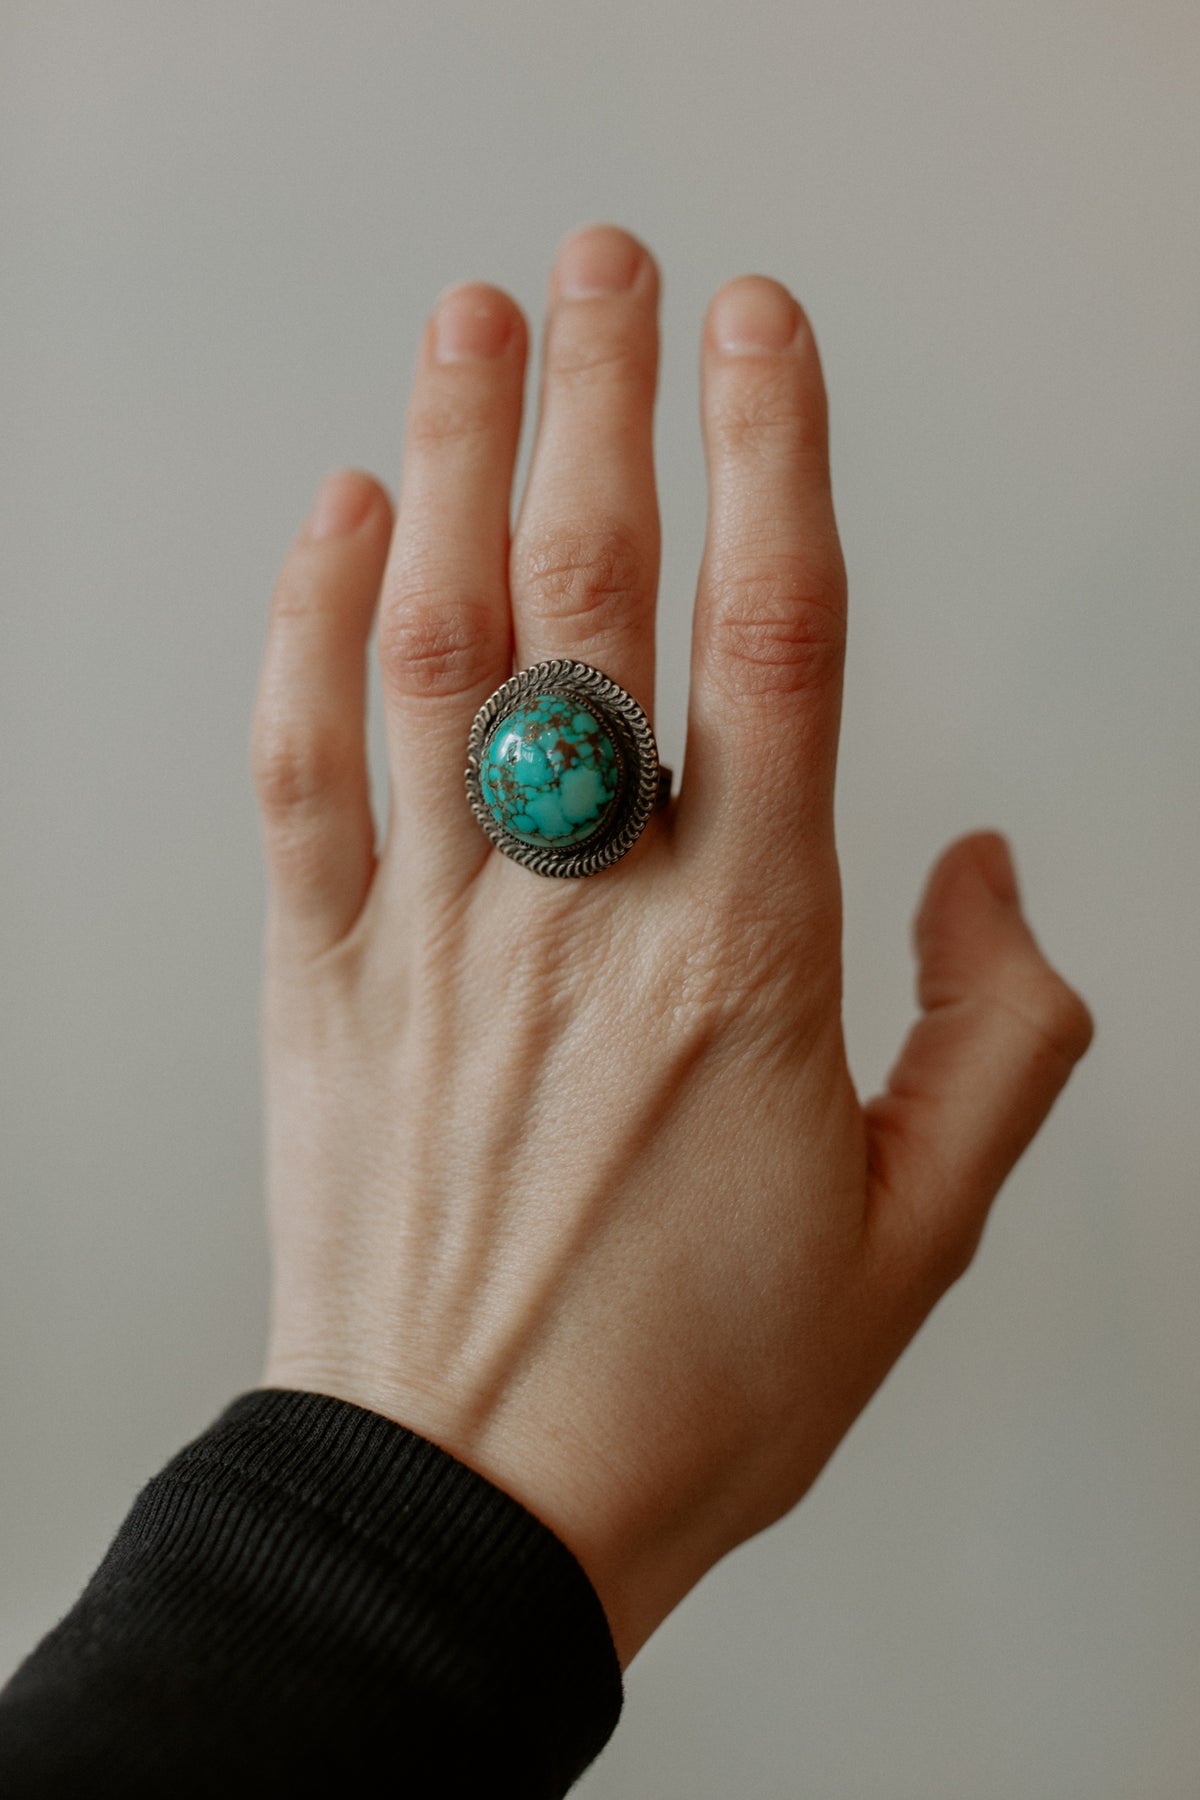 Vintage Turquoise Ring - Size 6.75